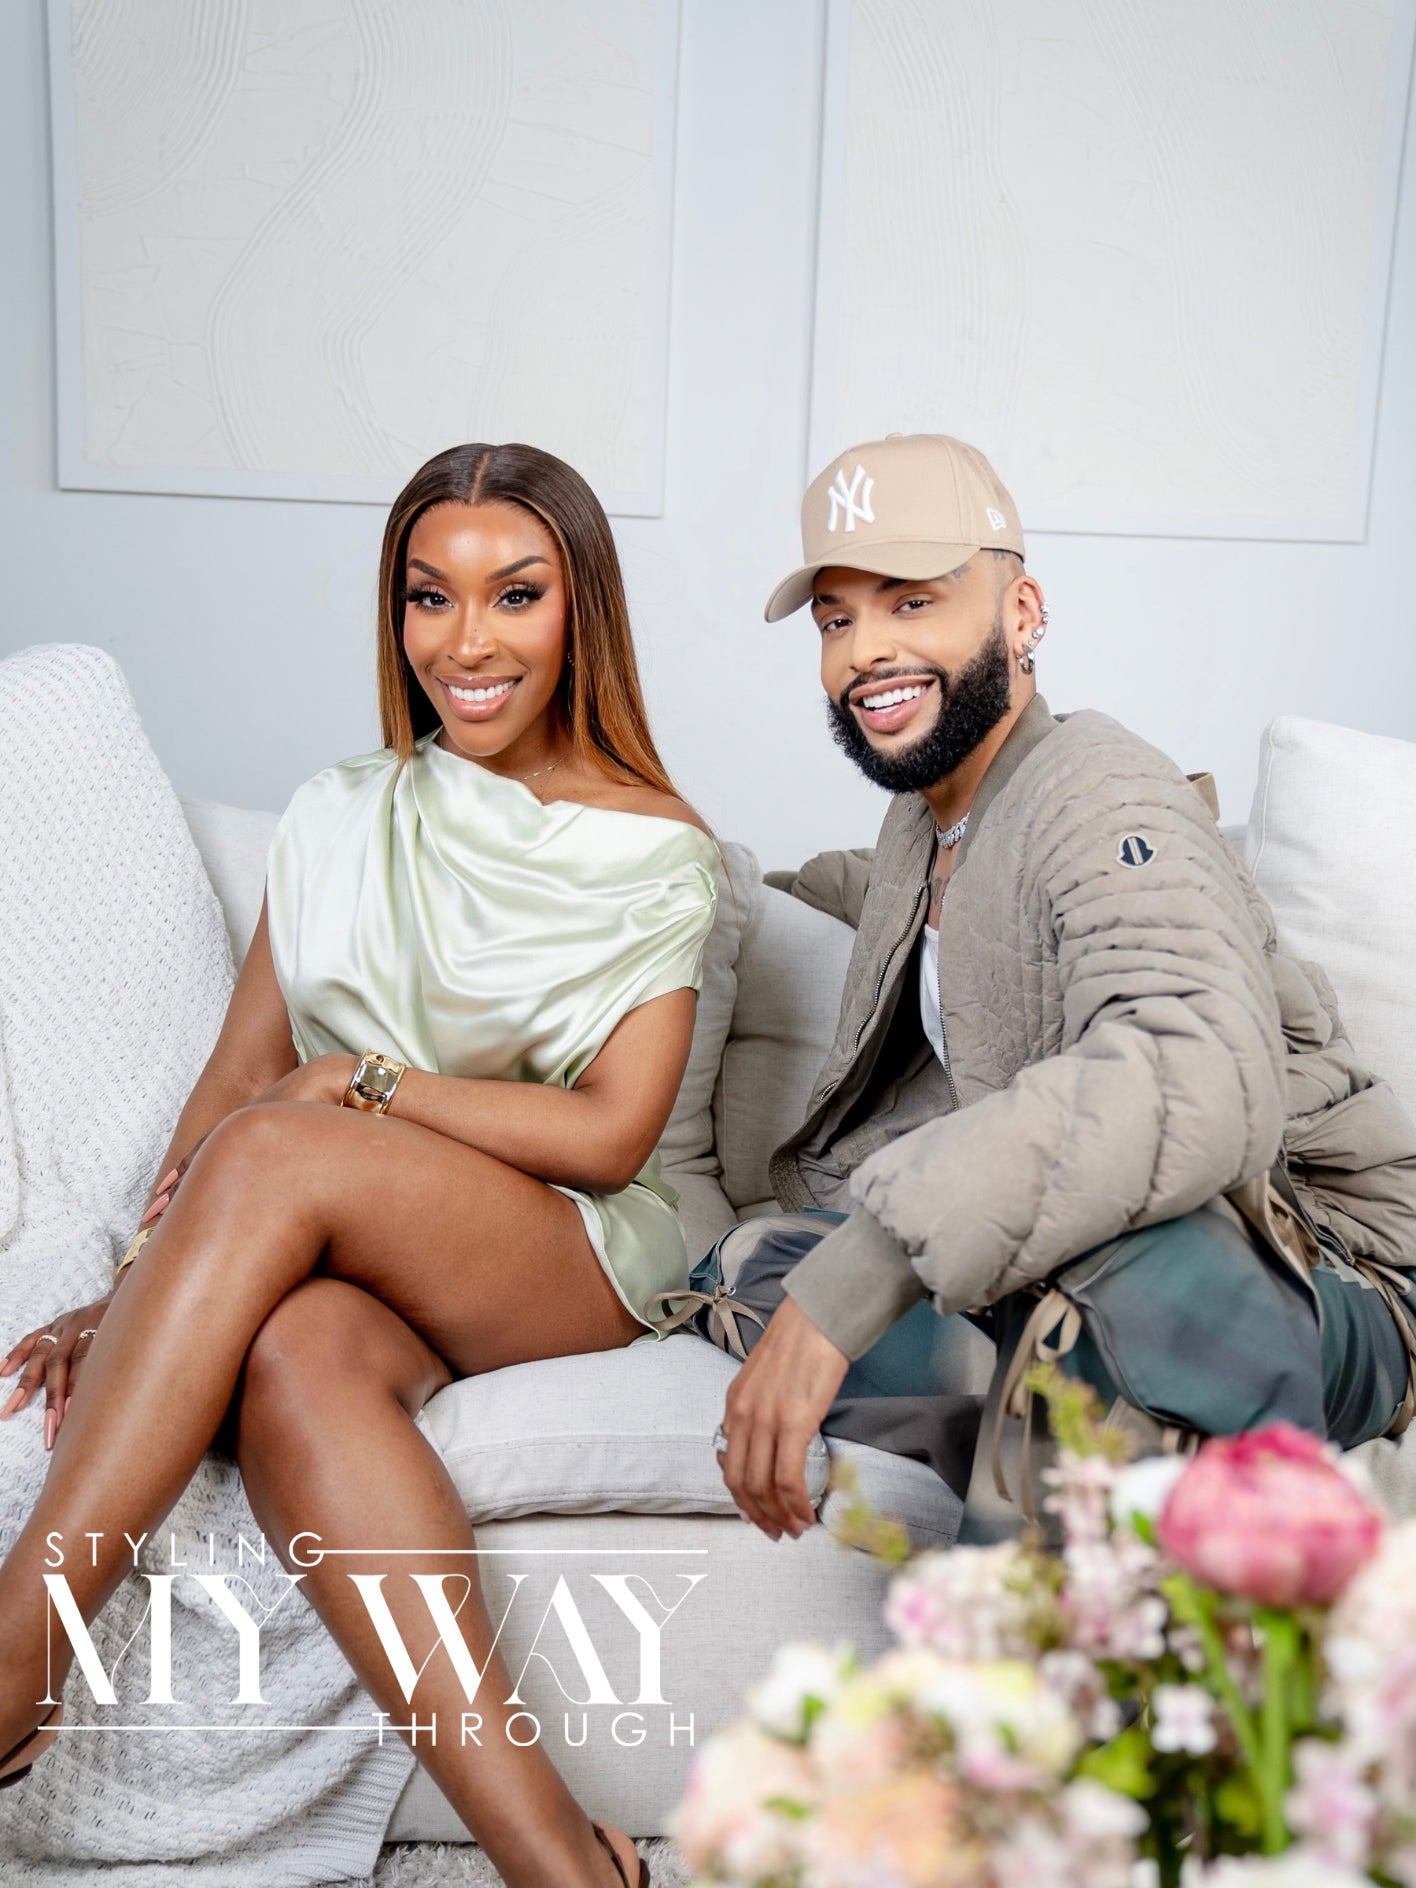 Celebrity Stylist Manny Jay On Launching His New Podcast ‘Styling My Way Through’